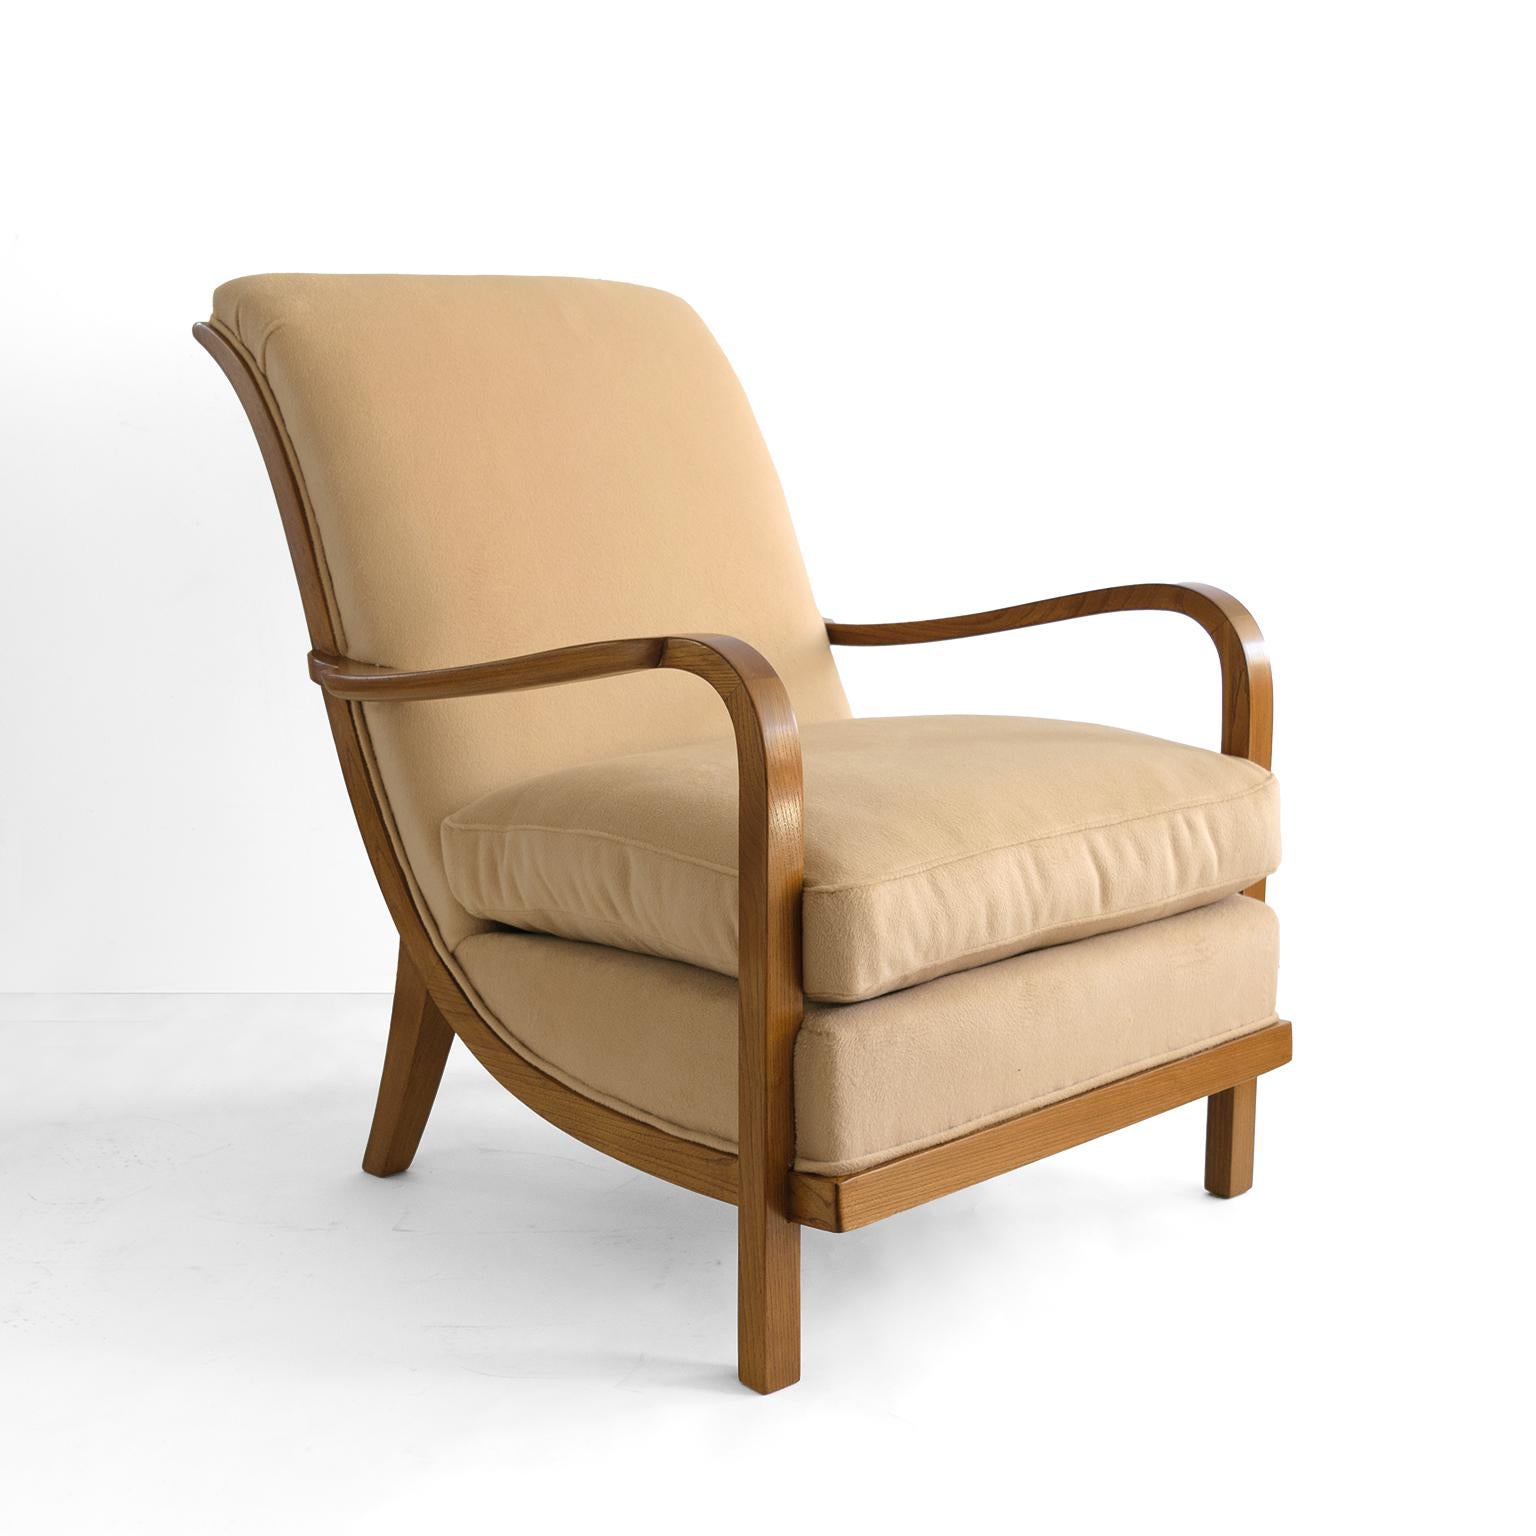 Elegant Swedish art deco armchair with a graceful scrolled back raised on sabre back legs. The chair is solid stained Elm and features a cantilevered platform seat with upholstered cushion. Produced by Wilhelm Knoll, Malmo, 1933. Newly refinished in